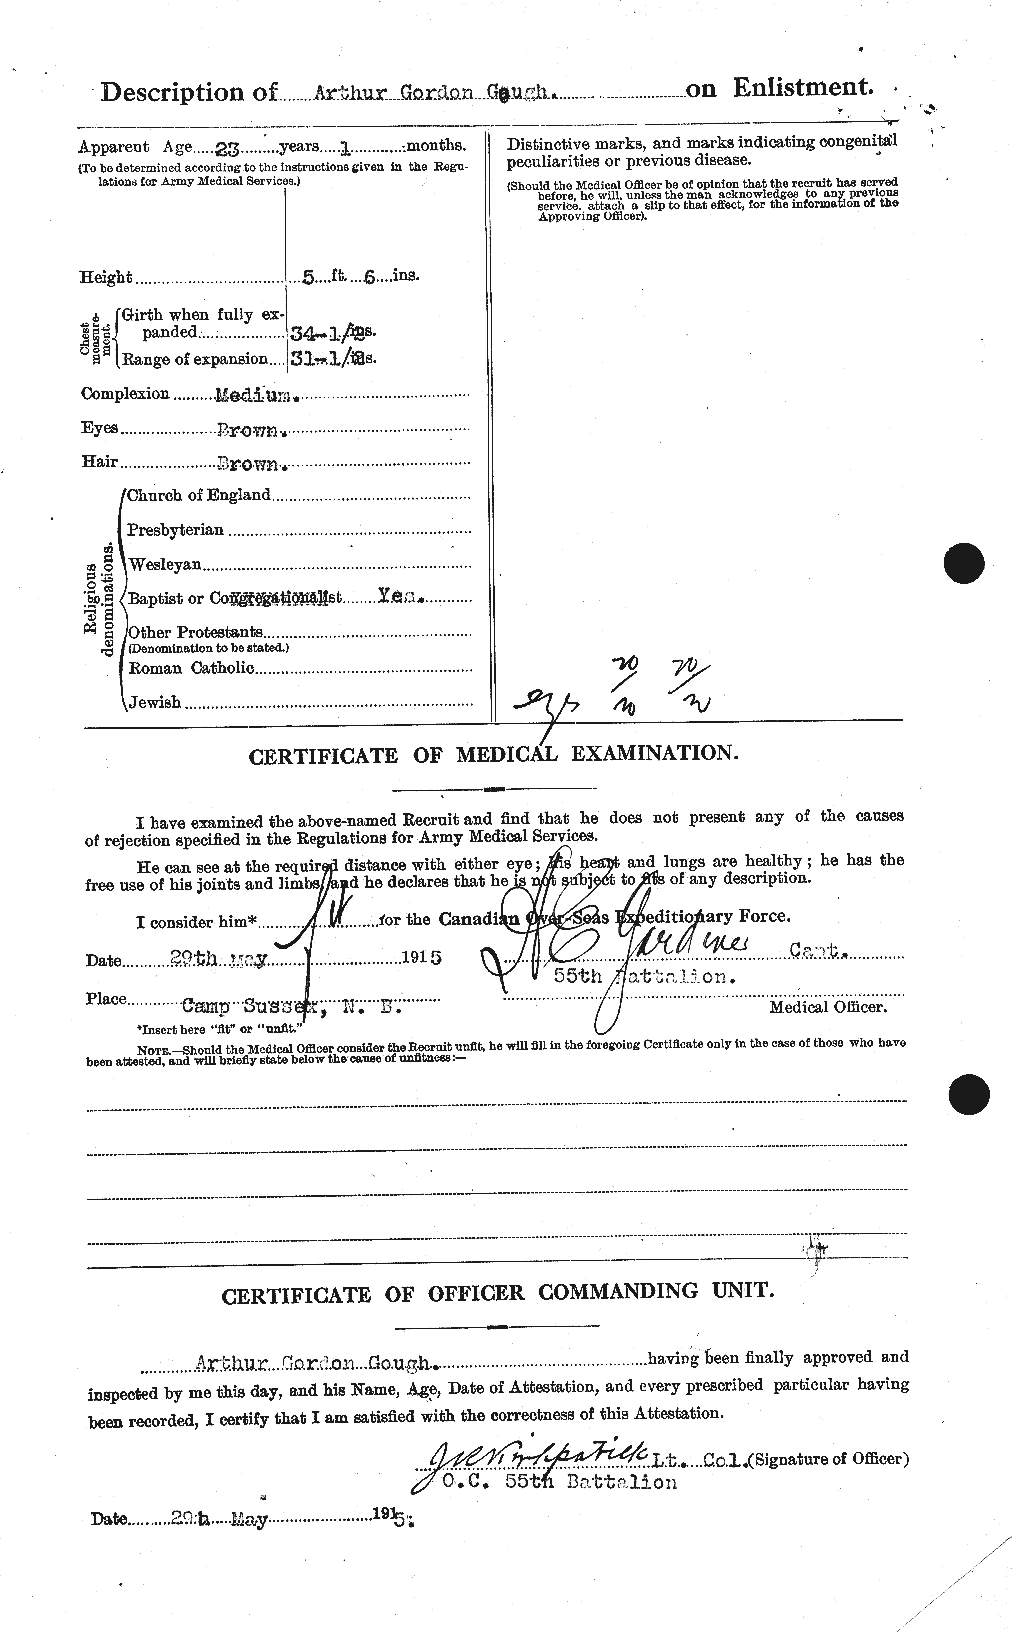 Personnel Records of the First World War - CEF 356370b